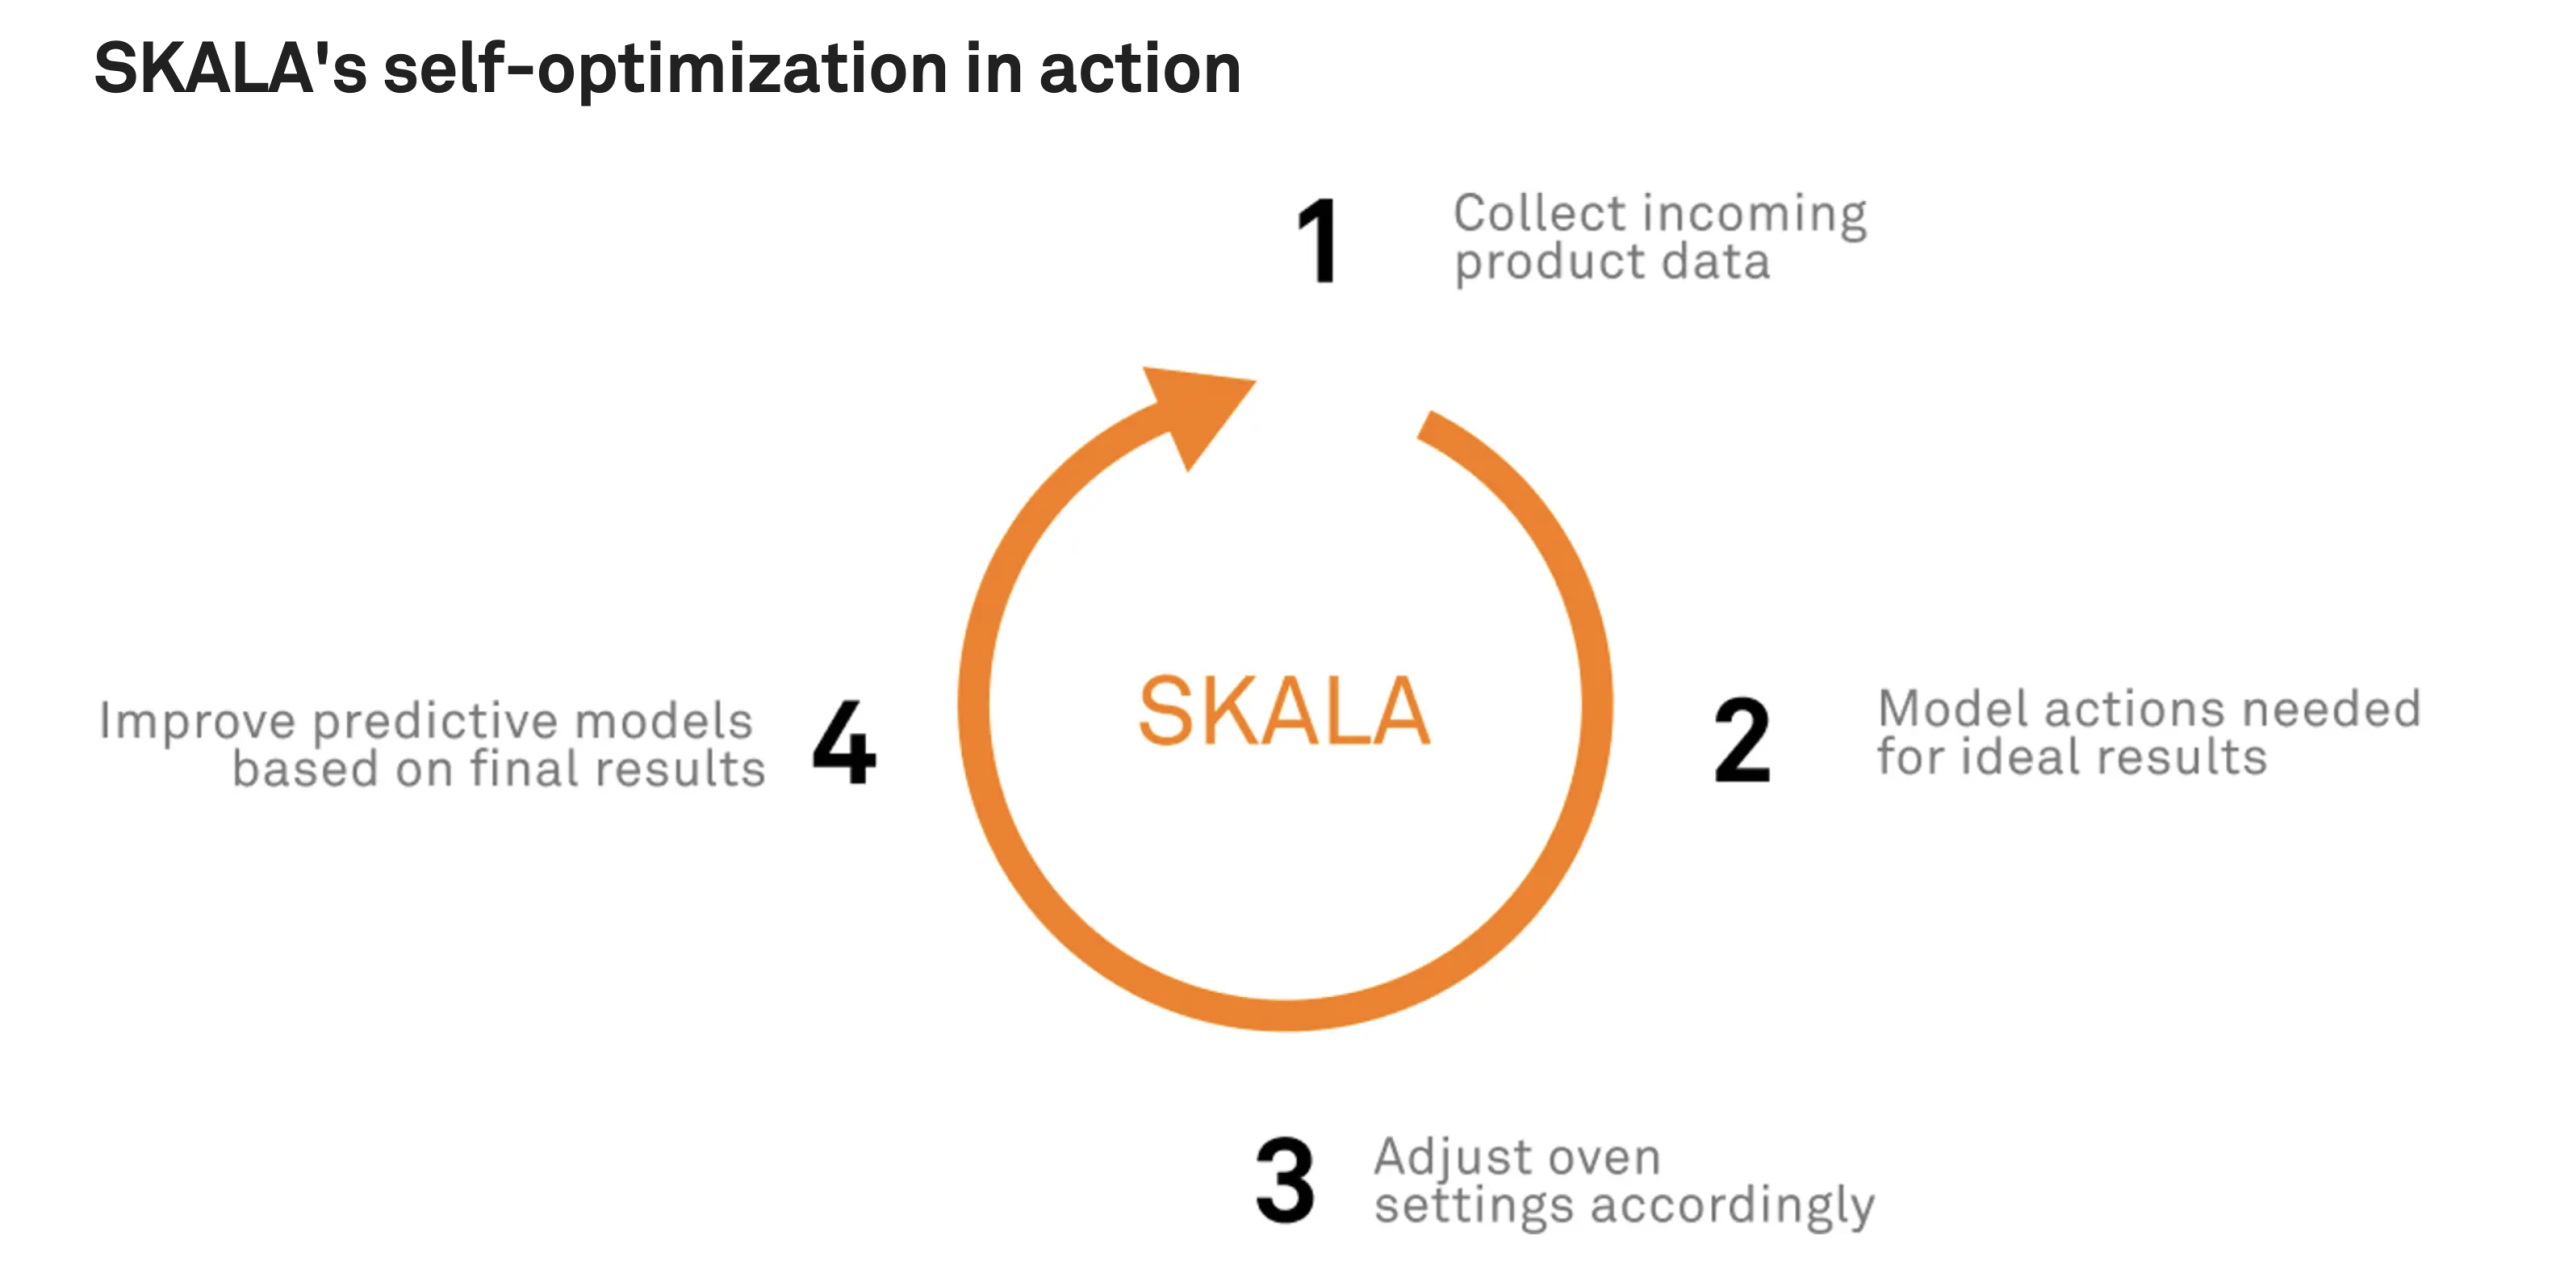 SKALA Solo automatically makes decisions based on data, allowing operators to produce optimal results with every batch run.